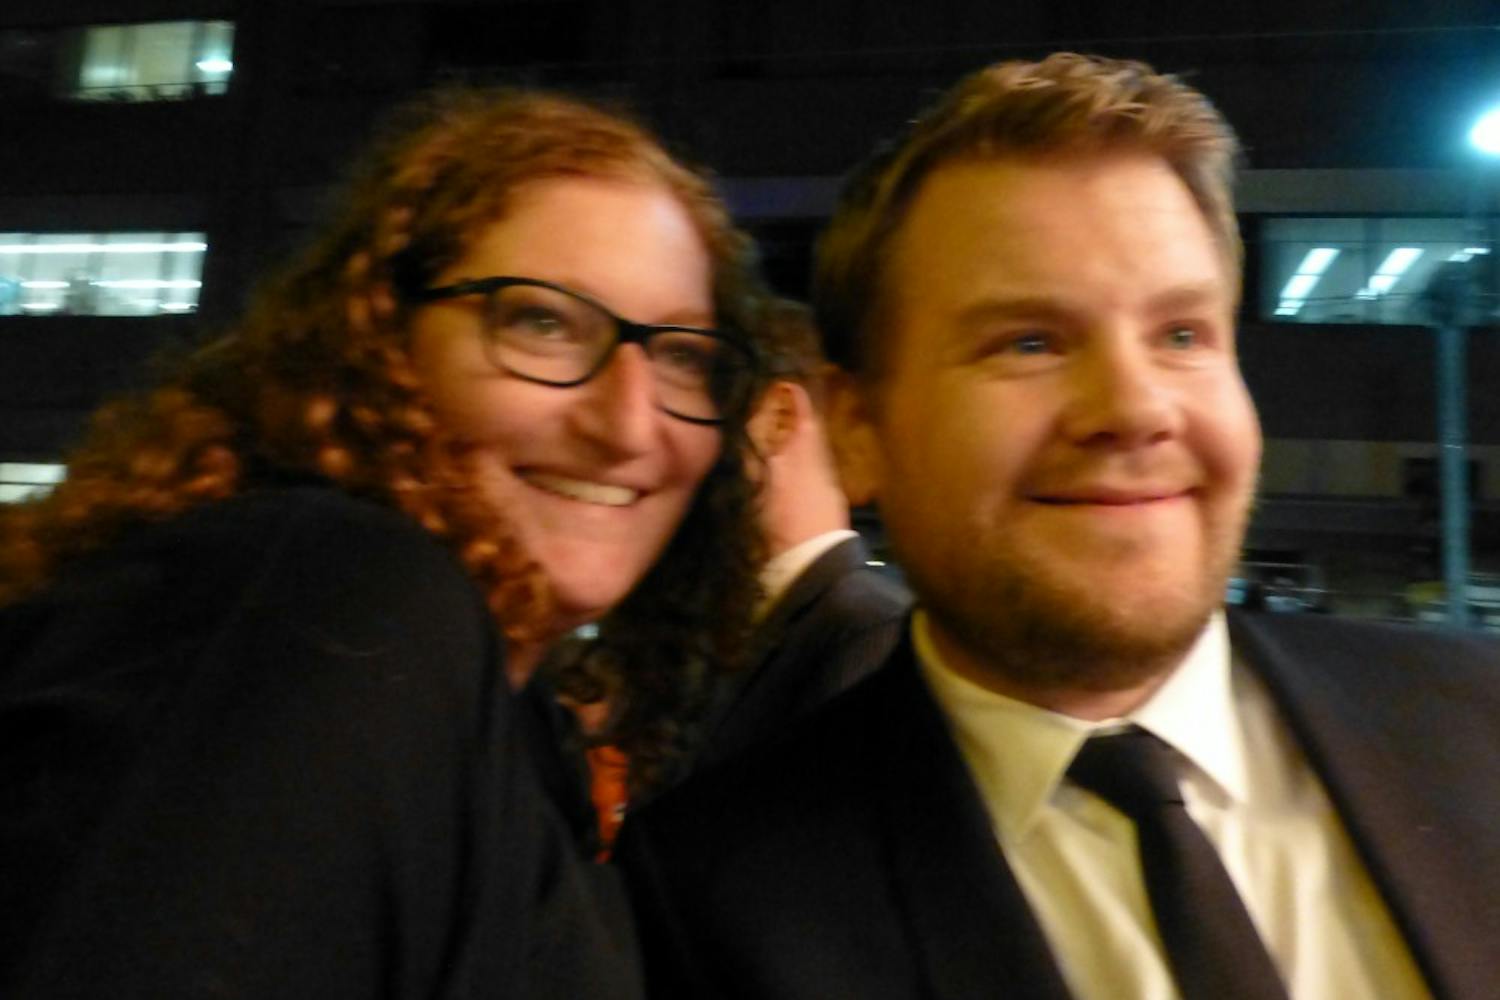 Fan with James Corden at the premiere of One Chance, Toronto Film Festival 2013 (WikiCommons)